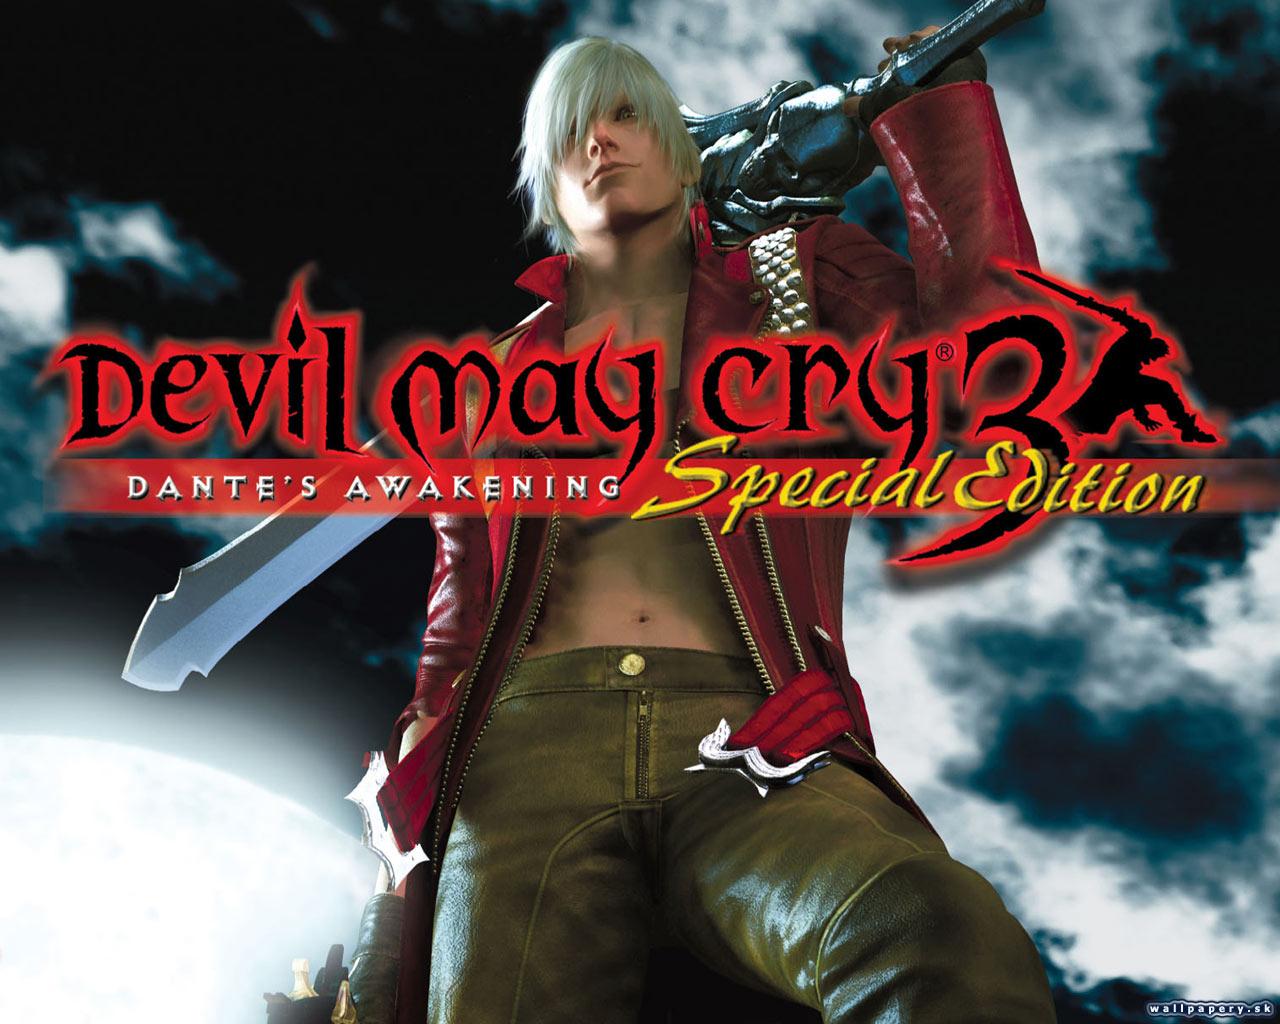 download free devil may cry hd collection